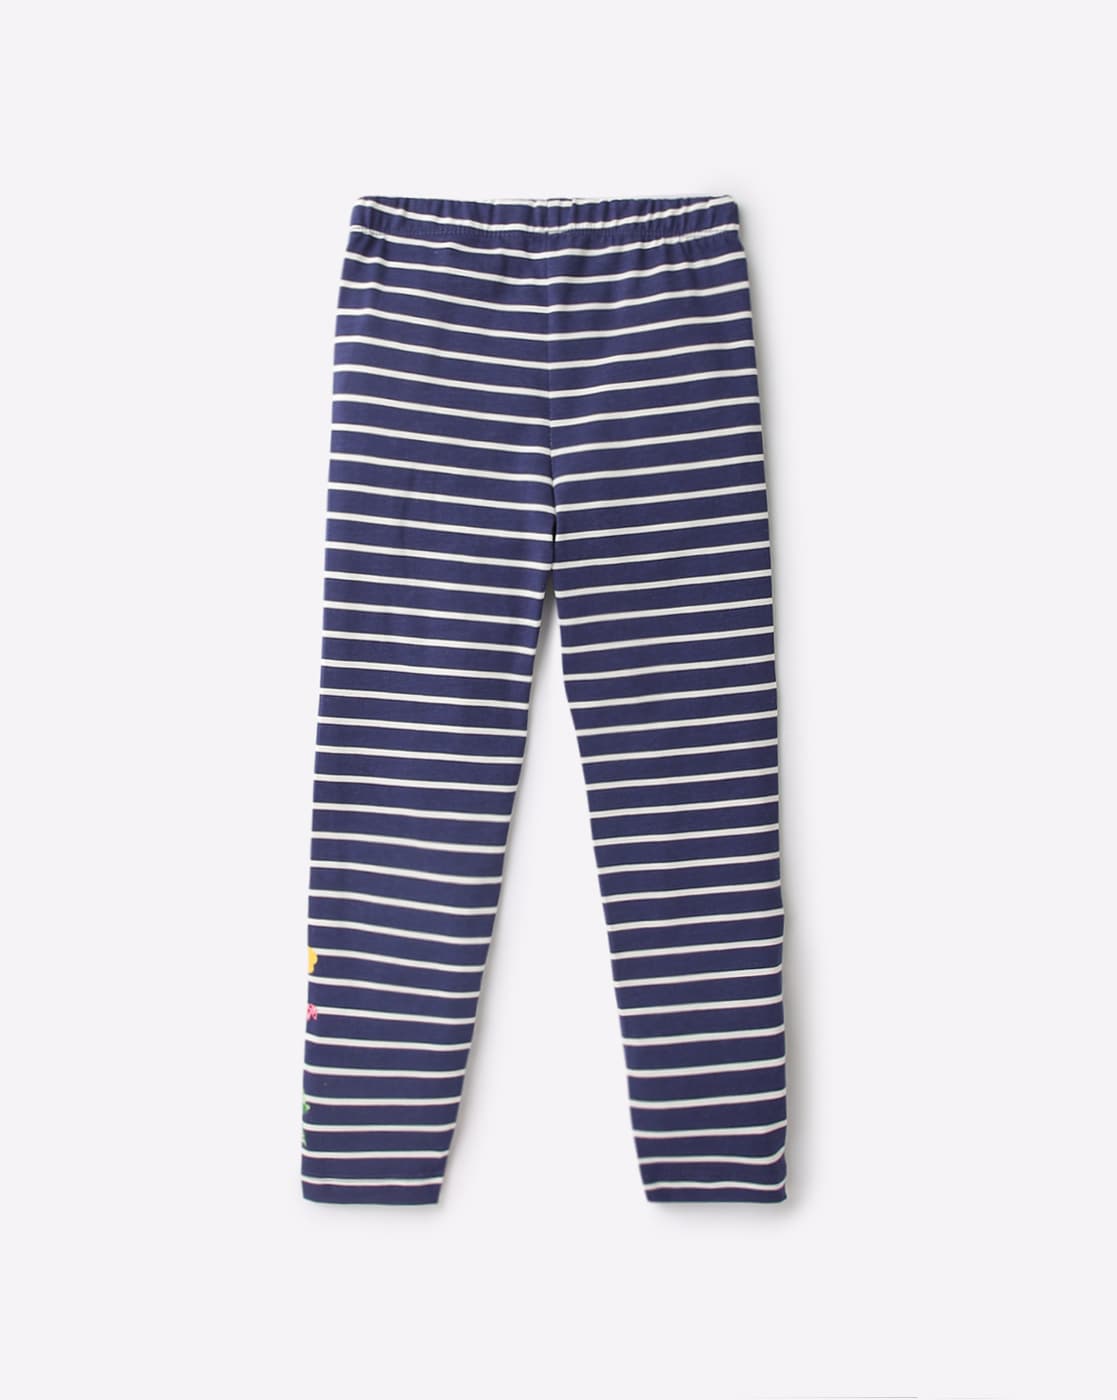 Buy The Children's Place Girls Blue Striped Leggings - Pack Of 2 - NNNOW.com